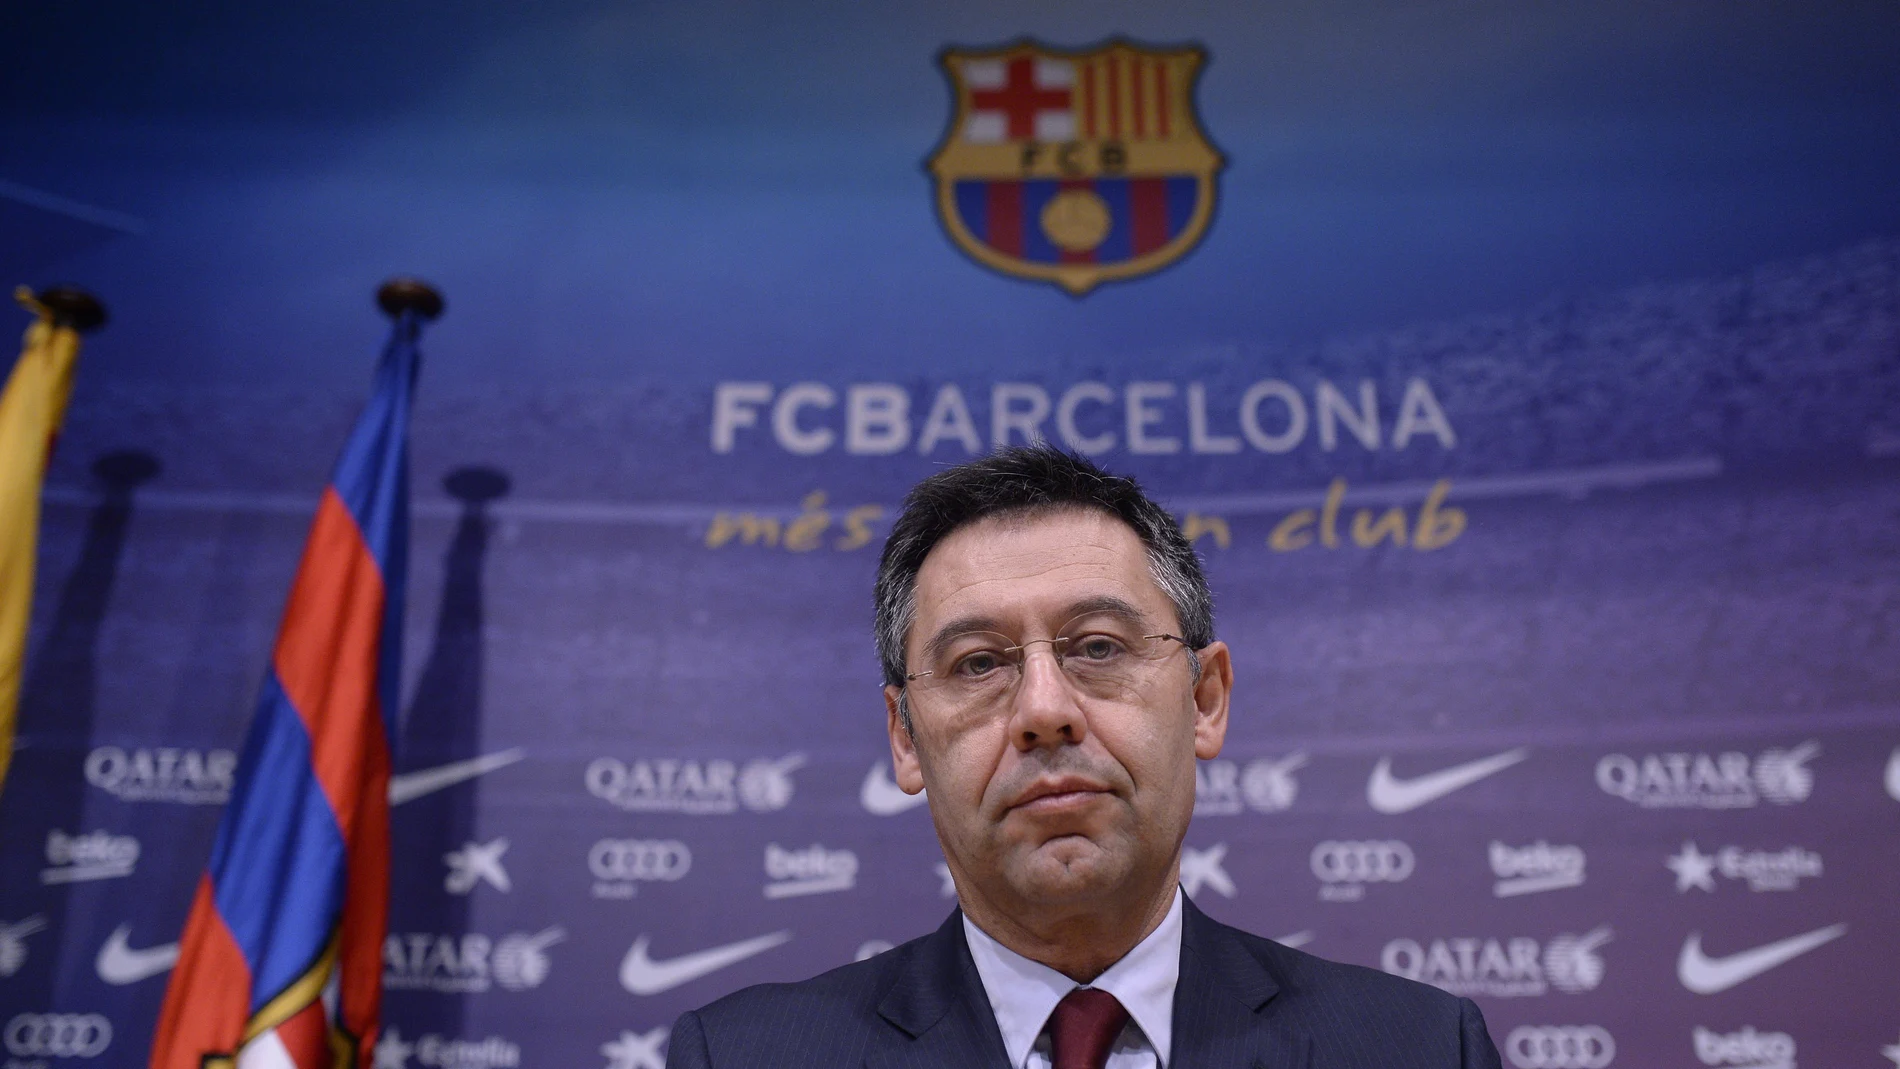 FC Barcelona's president Josep Maria Bartomeu attends a press conference at the Camp Nou stadium in Barcelona, Spain.